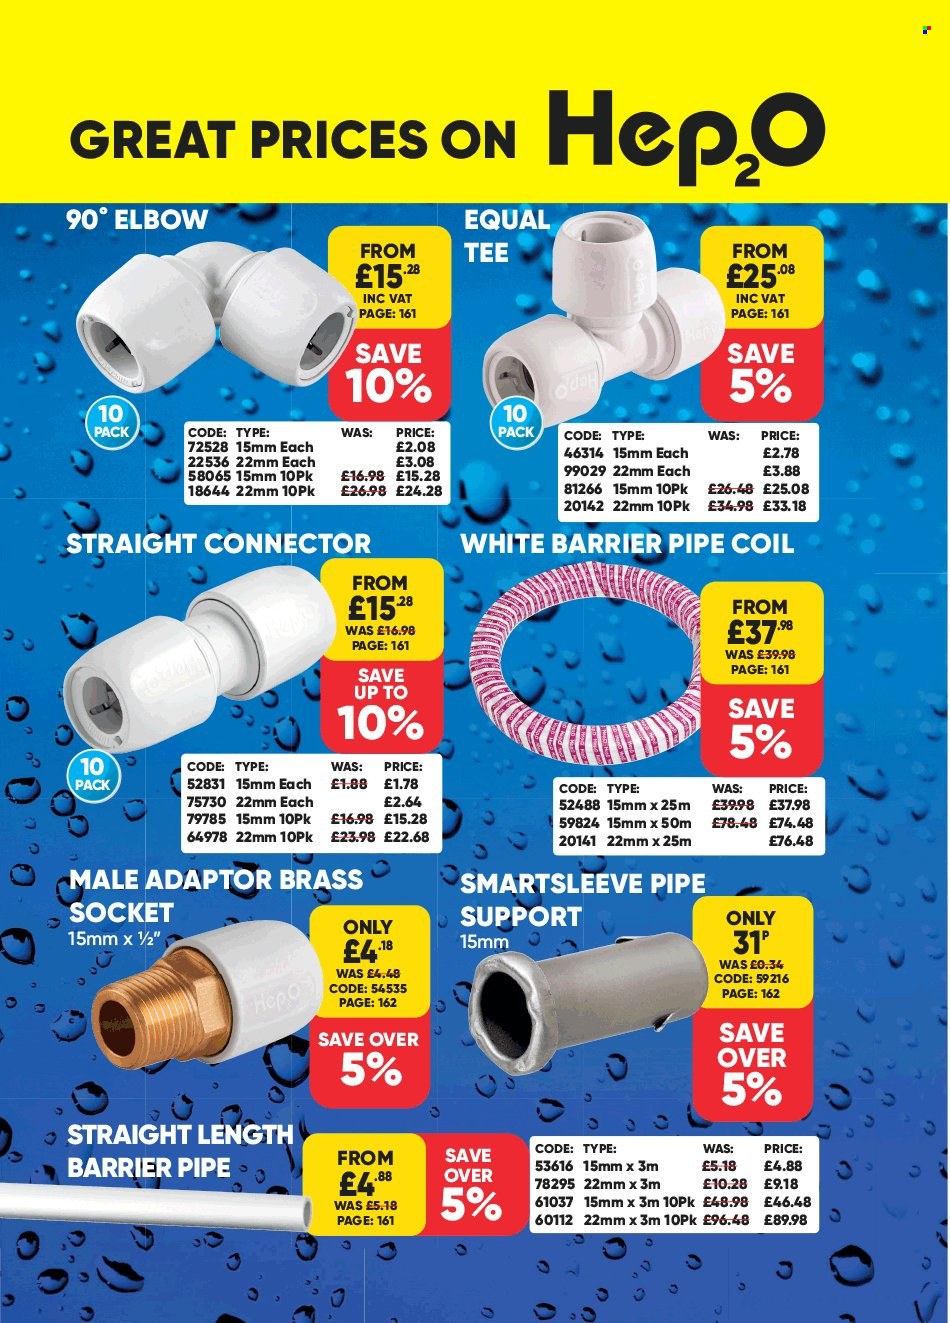 Toolstation offer . Page 156.